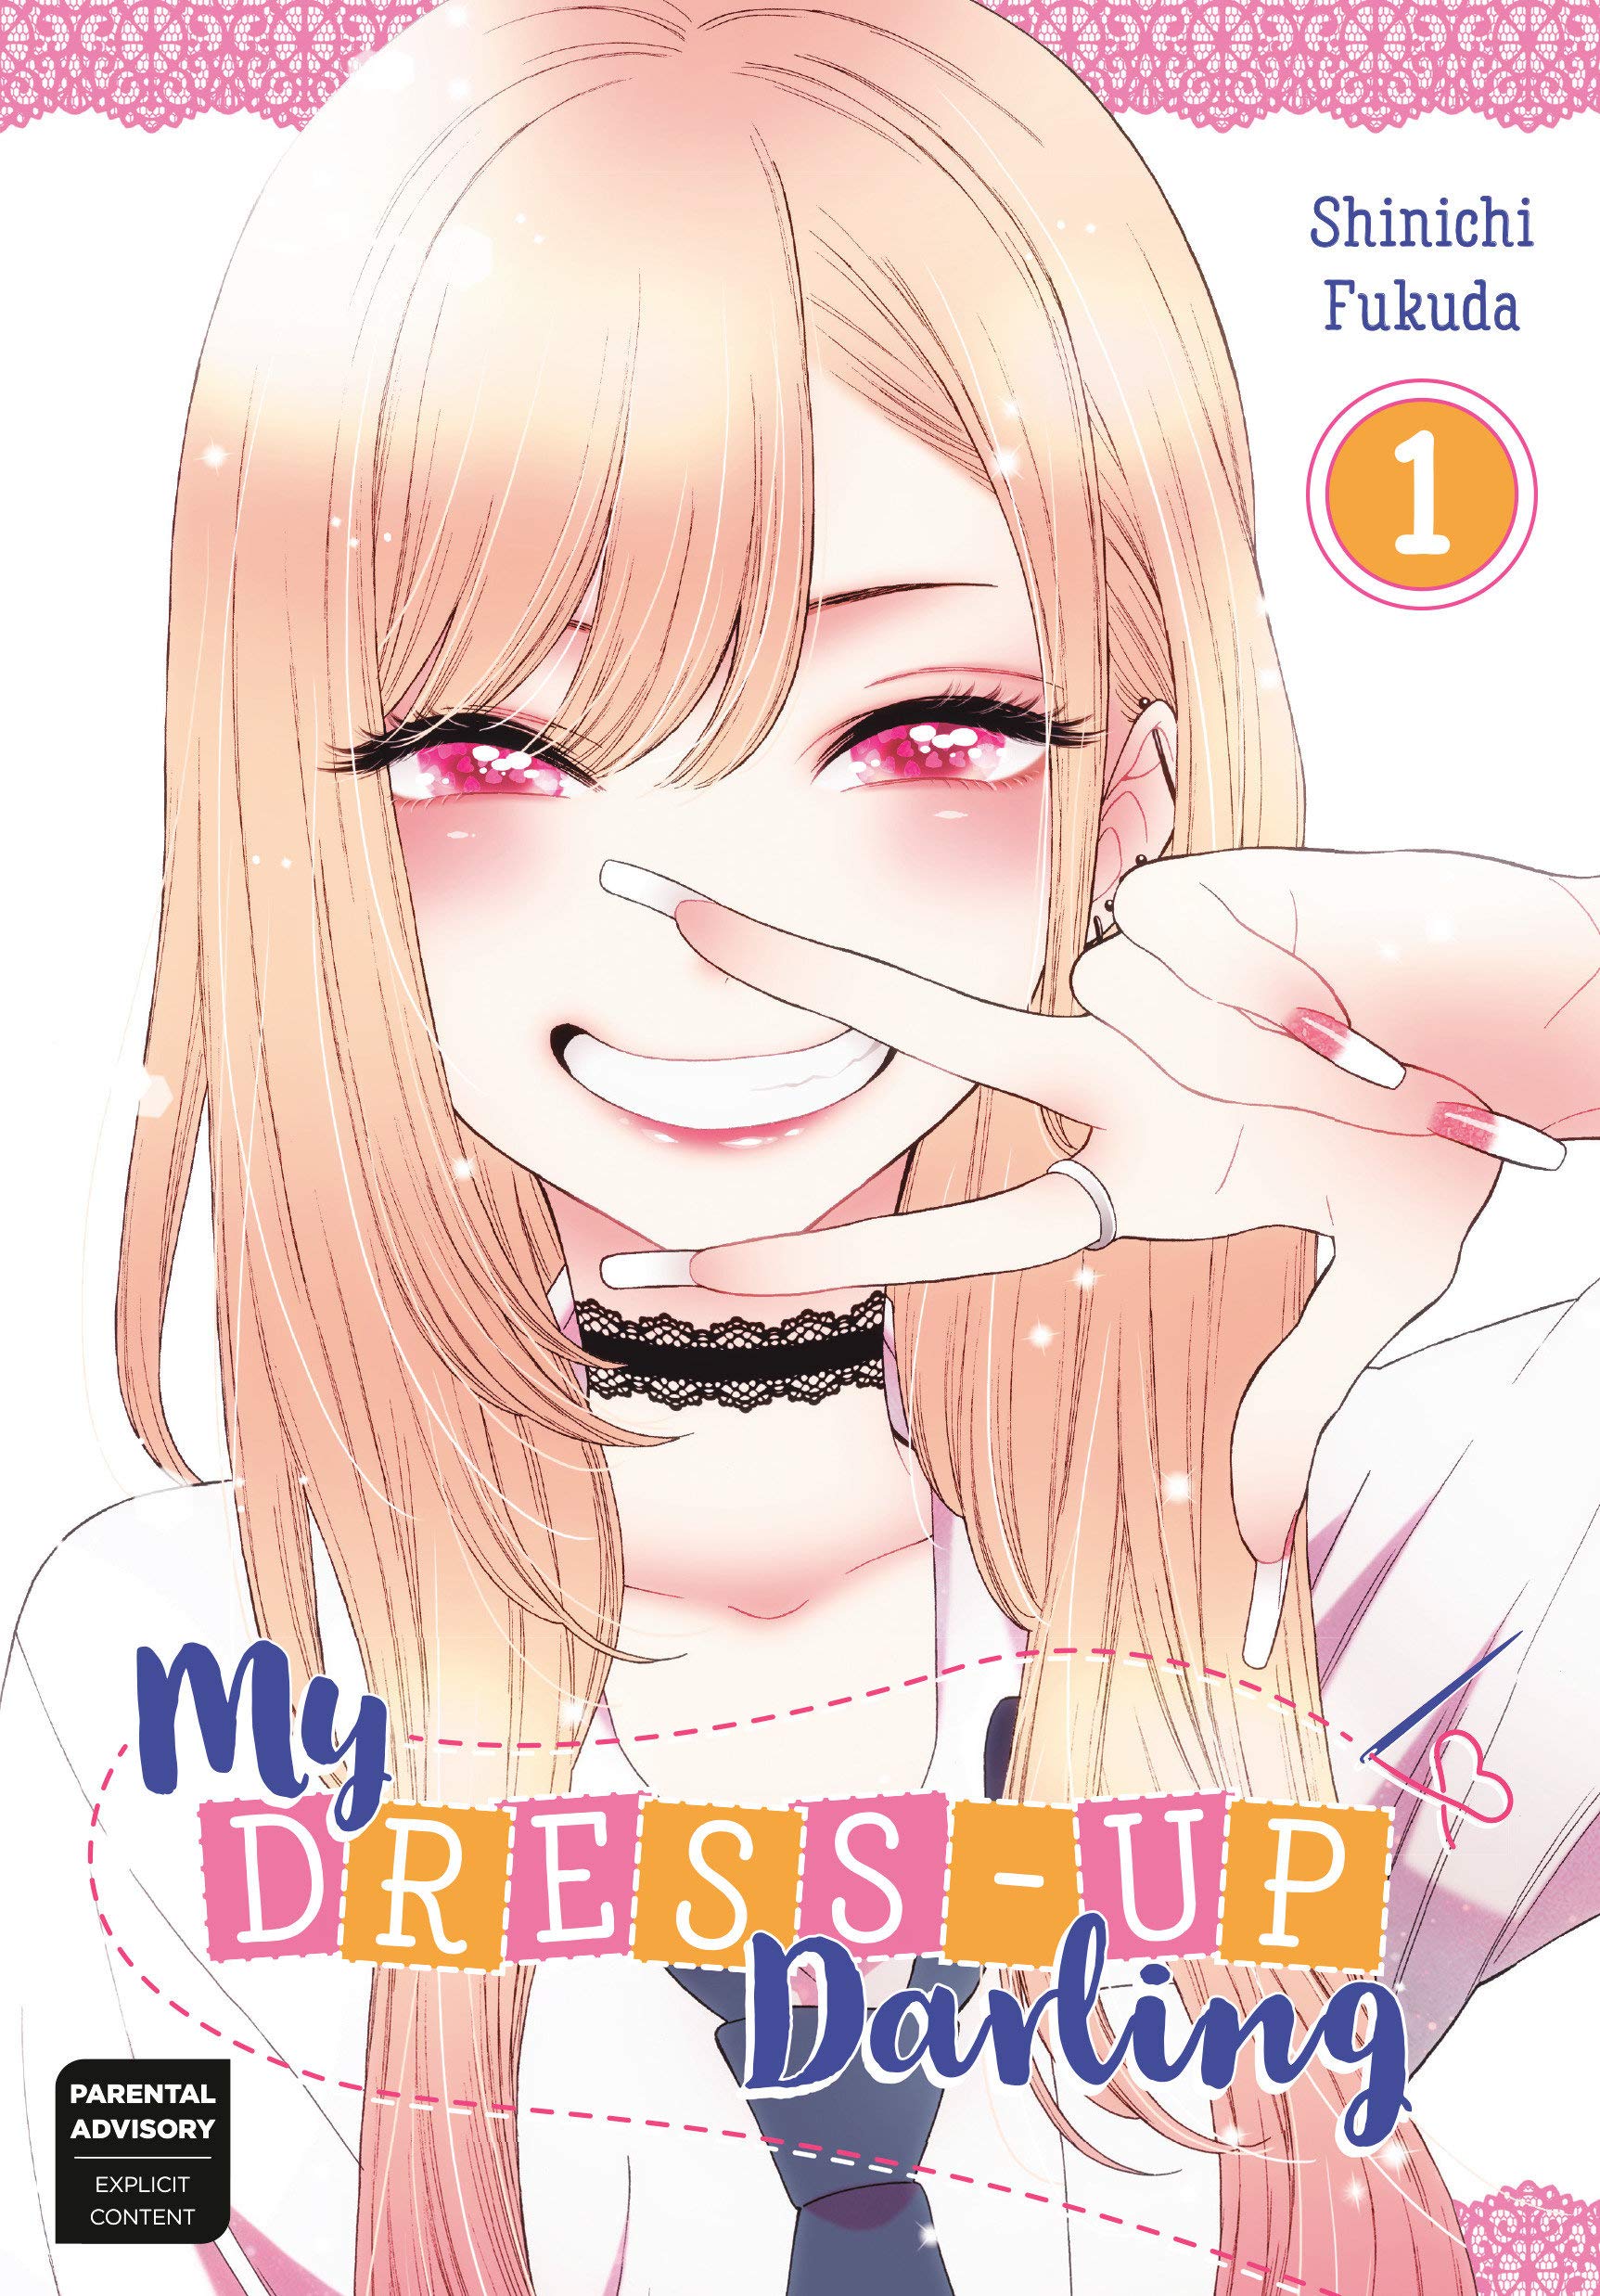 Sequel to the TV anime My Dress-Up Darling